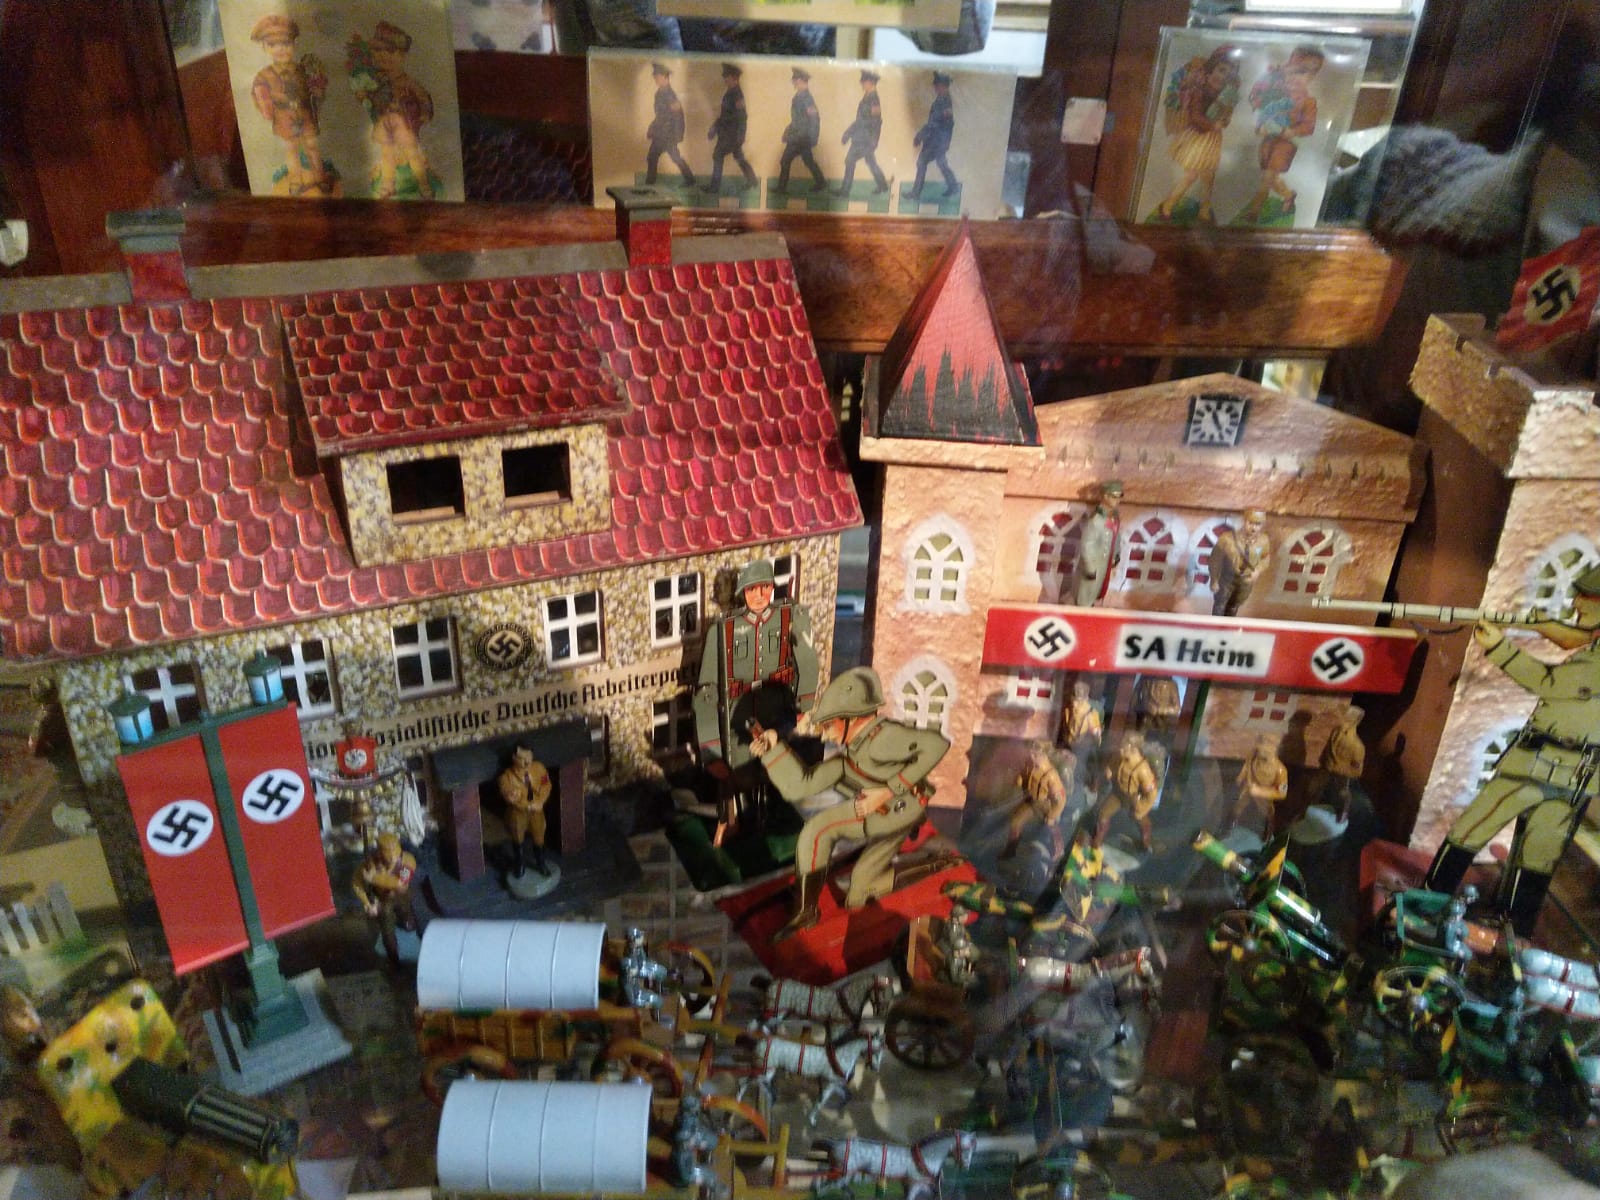 Best Toy Museum I Have Seen